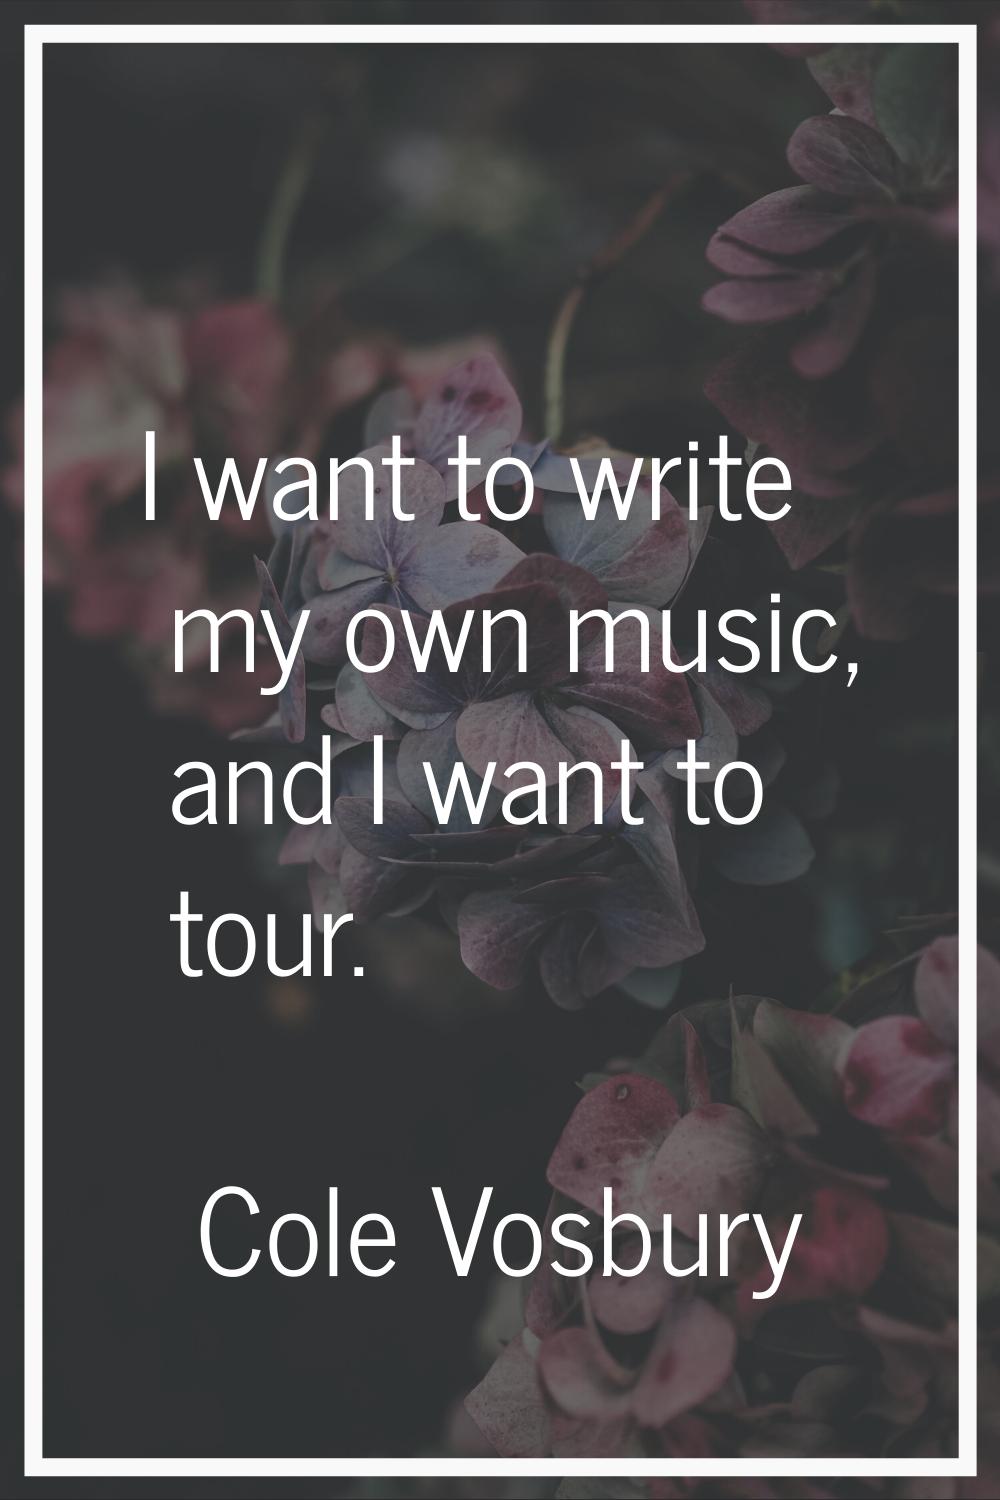 I want to write my own music, and I want to tour.